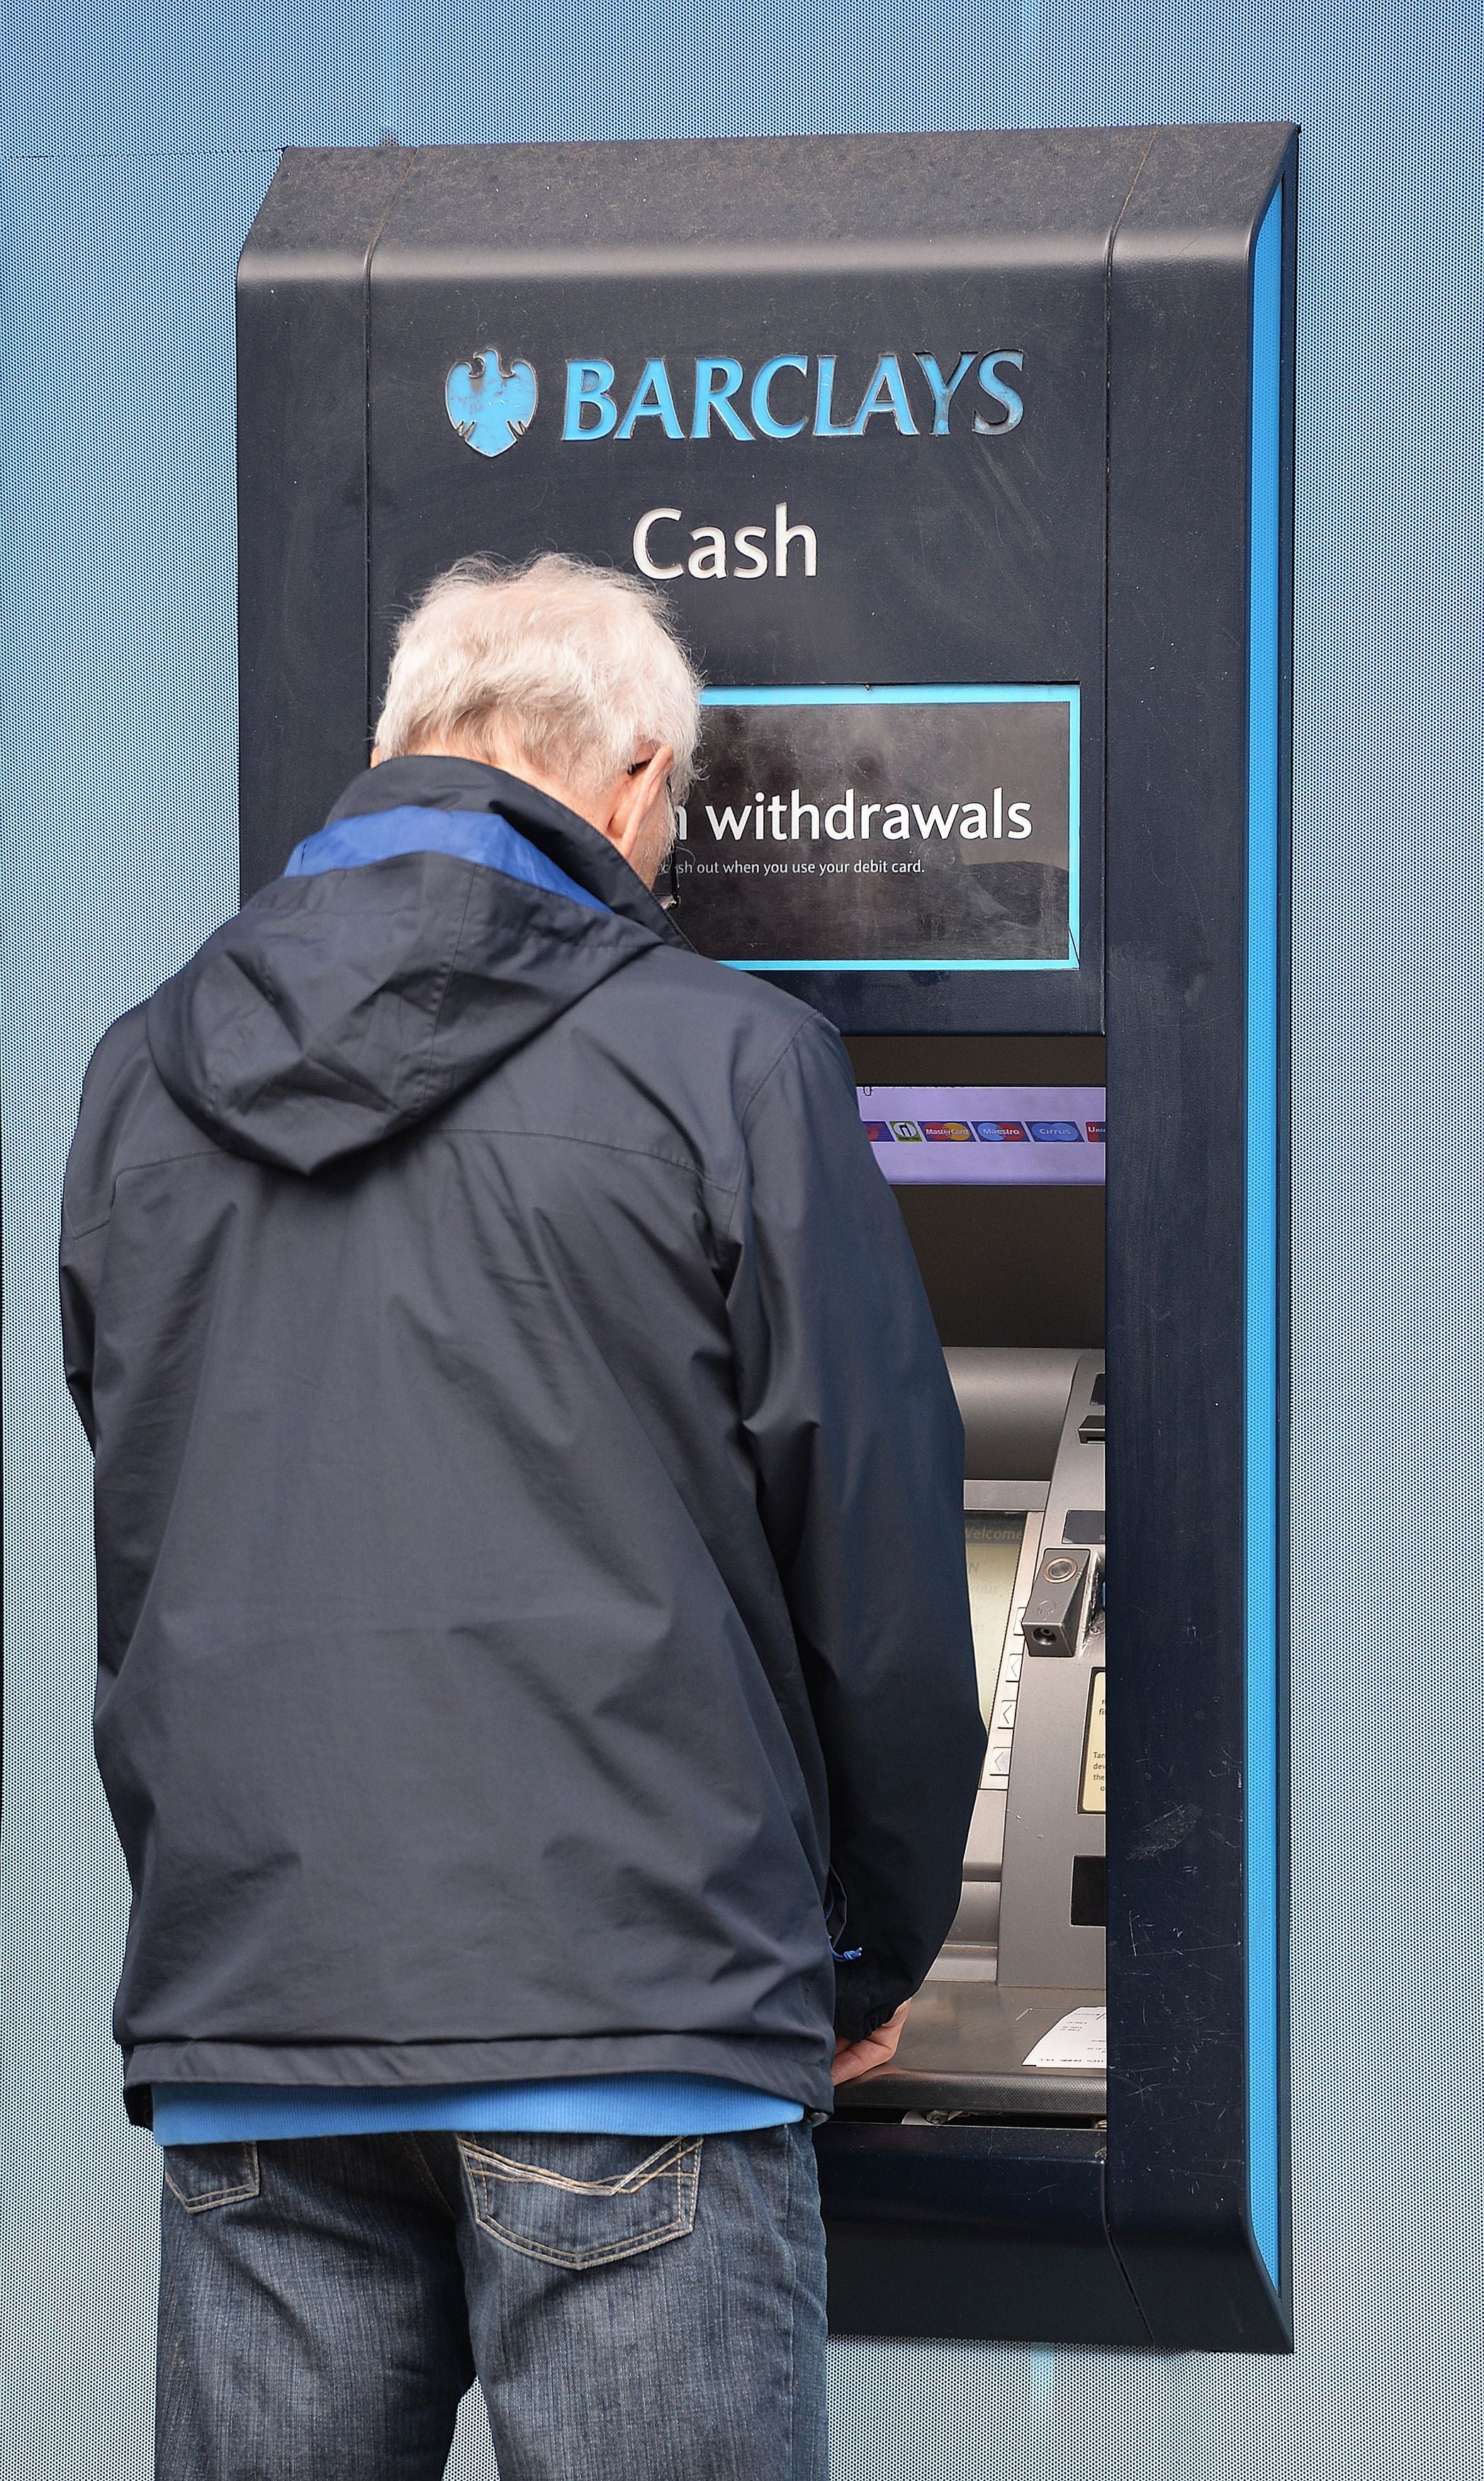 People will continue be able to access their own cash with ease, under measures promised in the Financial Services and Markets Bill (John Stillwell/PA)